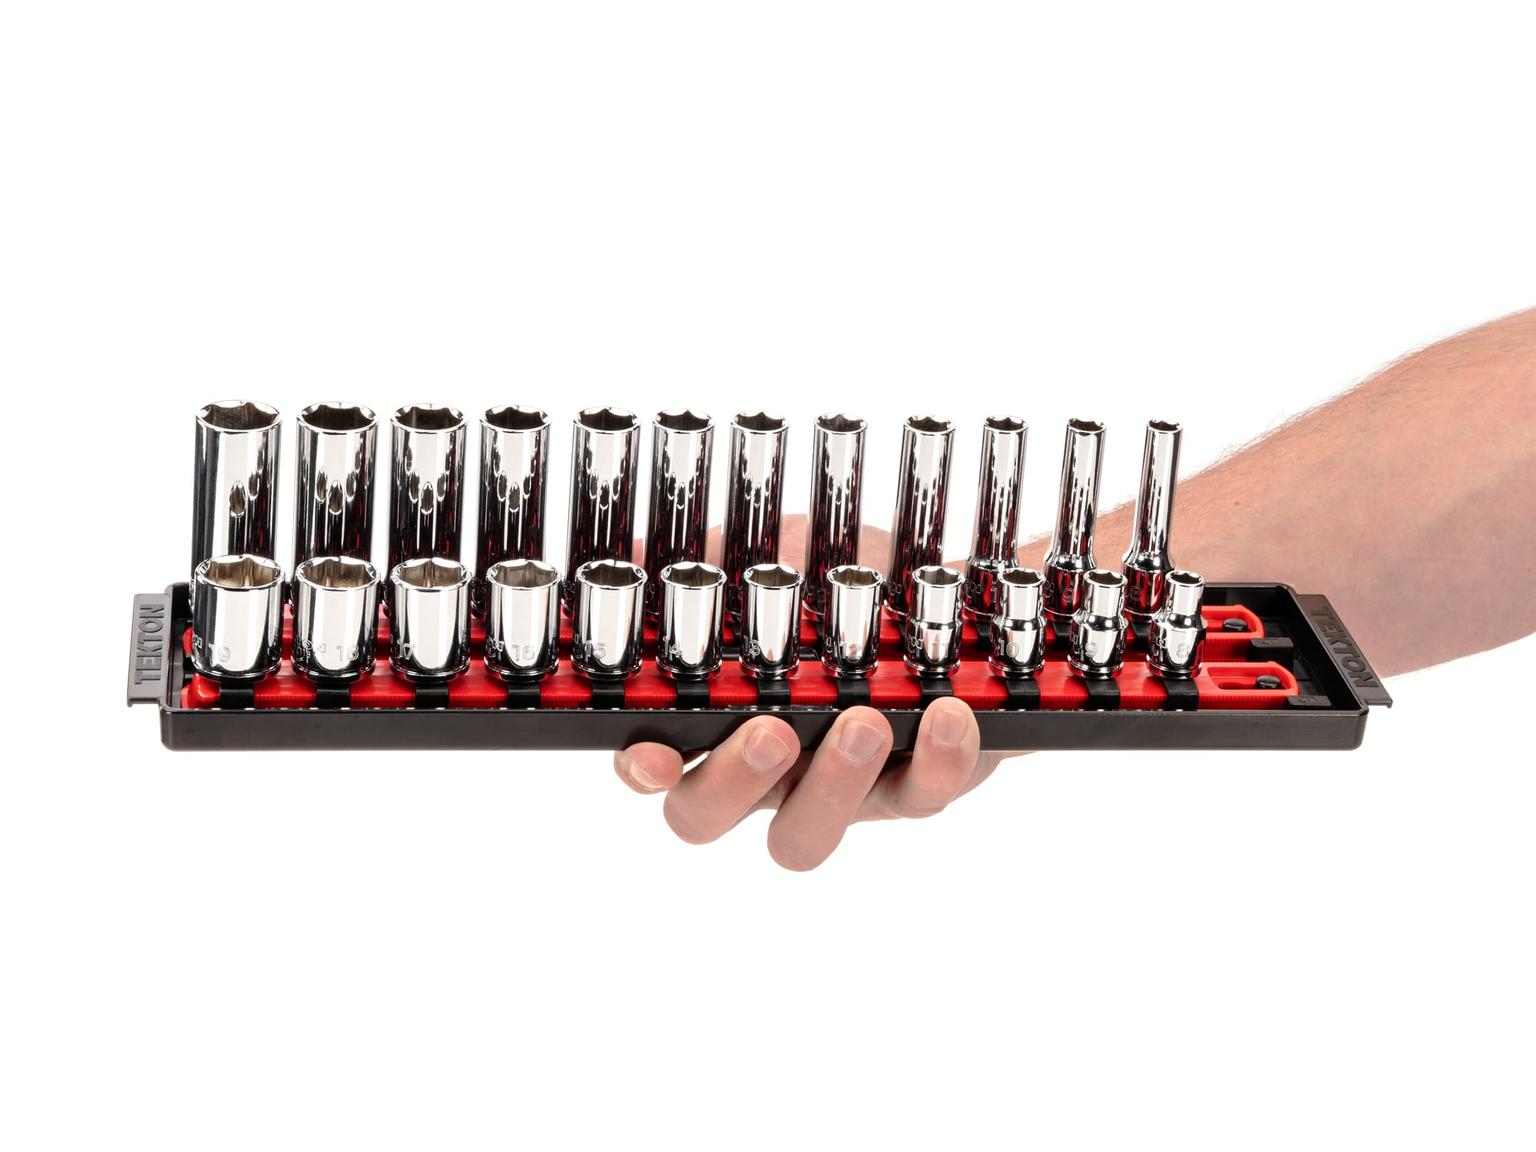 TEKTON SHD91218-T 3/8 Inch Drive 6-Point Socket Set with Rails, 42-Piece (5/16-3/4 in., 8-19 mm)